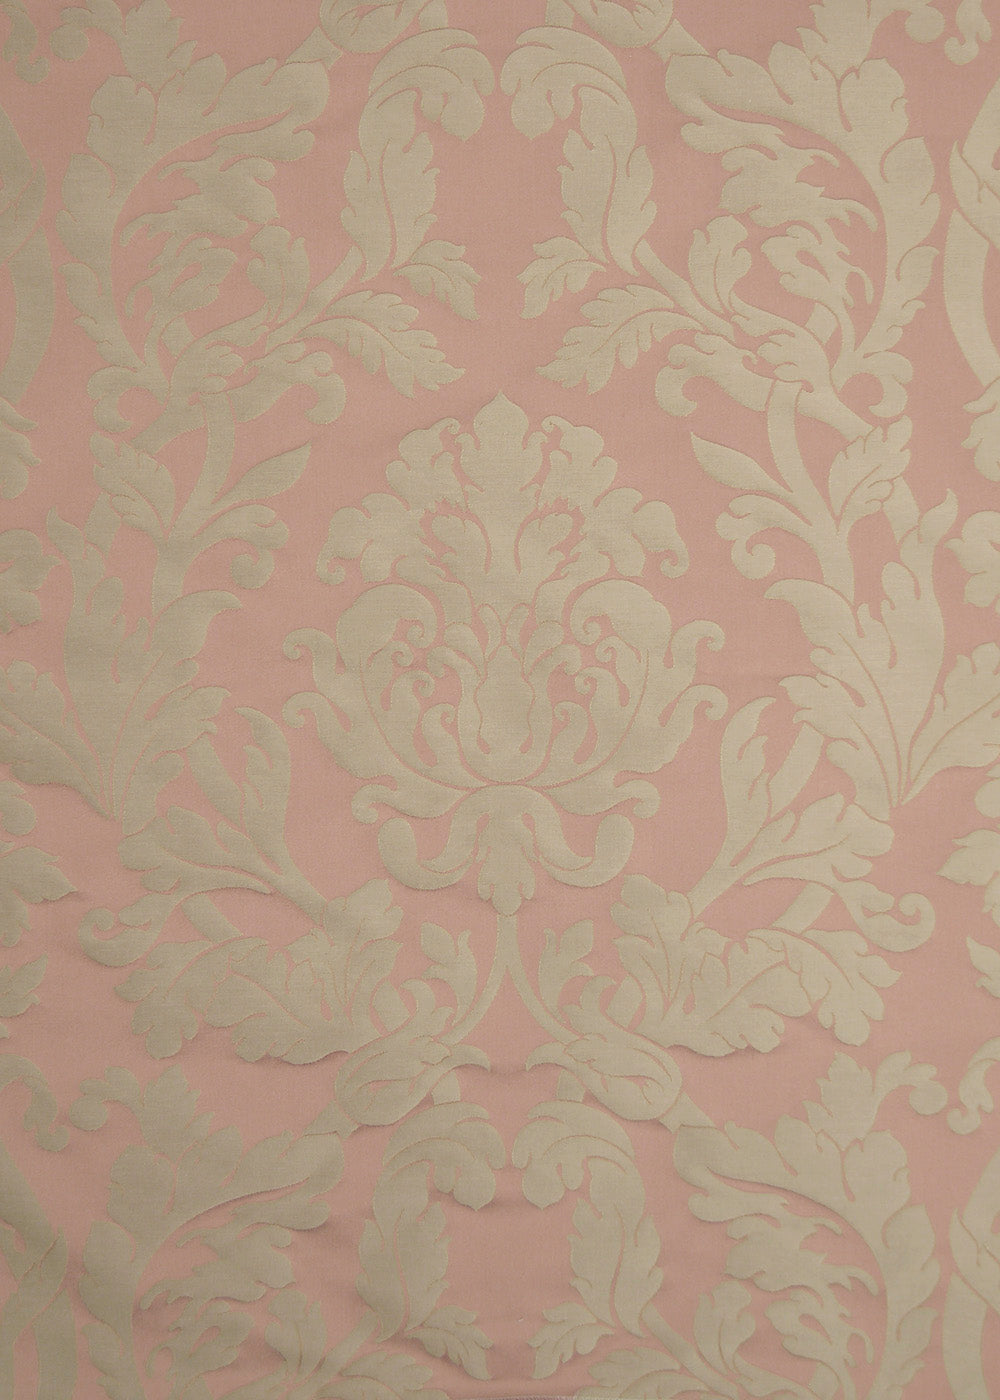 baby pink satin fabric with a subtle damask pattern